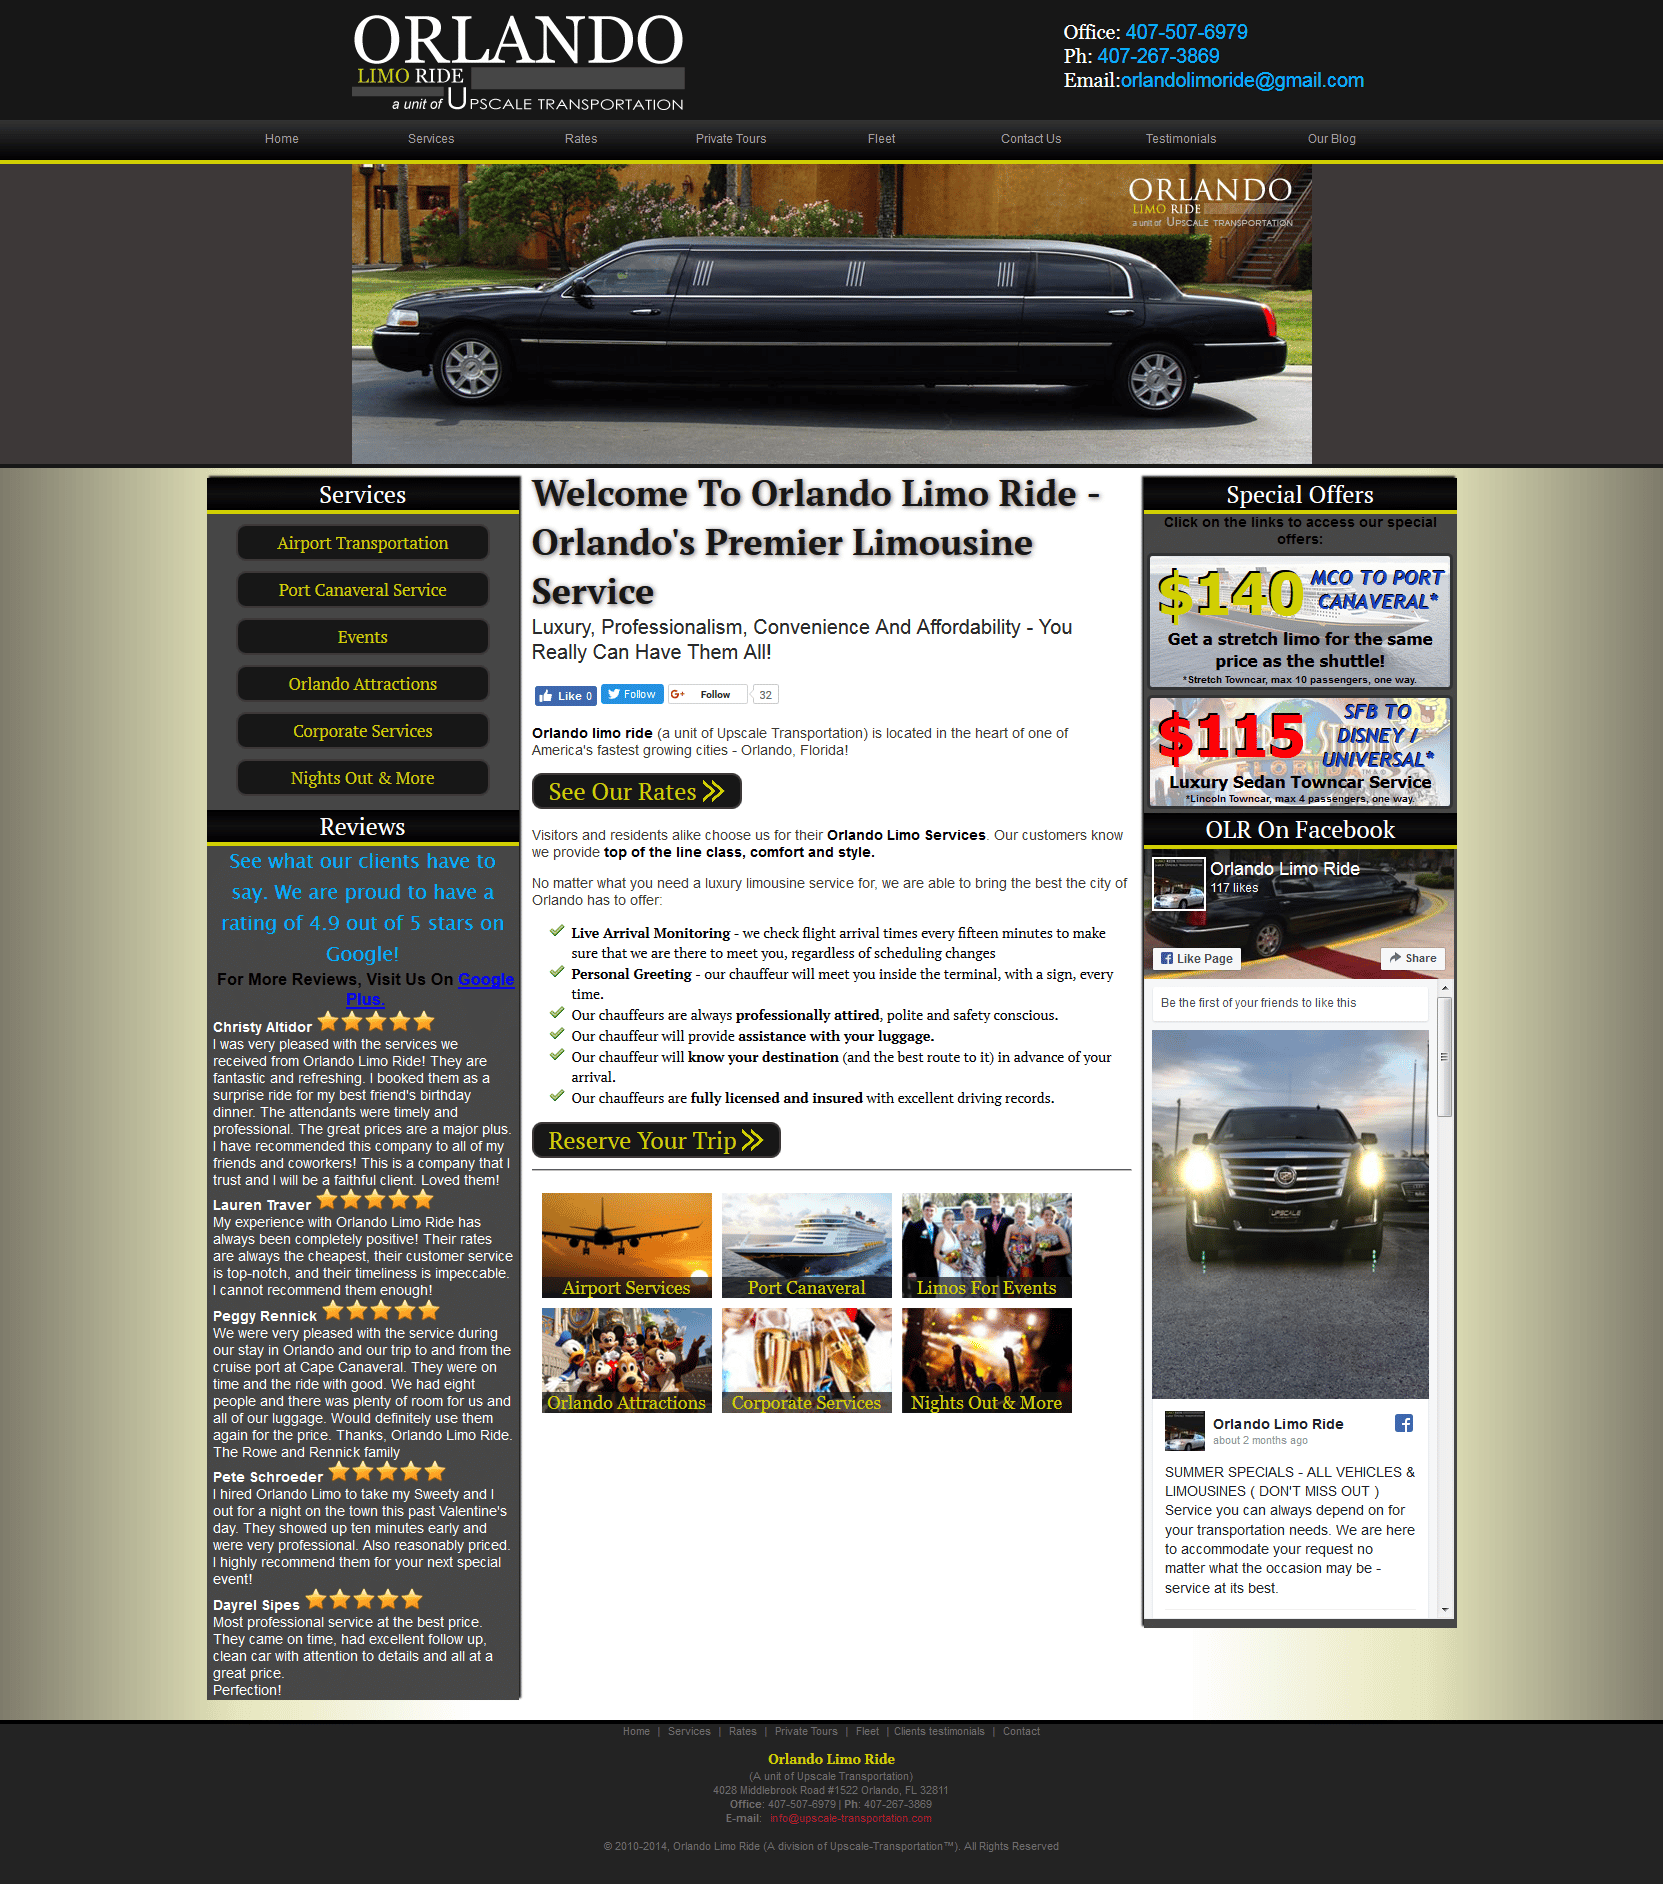 Orlando Limo Ride website built by Suffolk County Webmasters